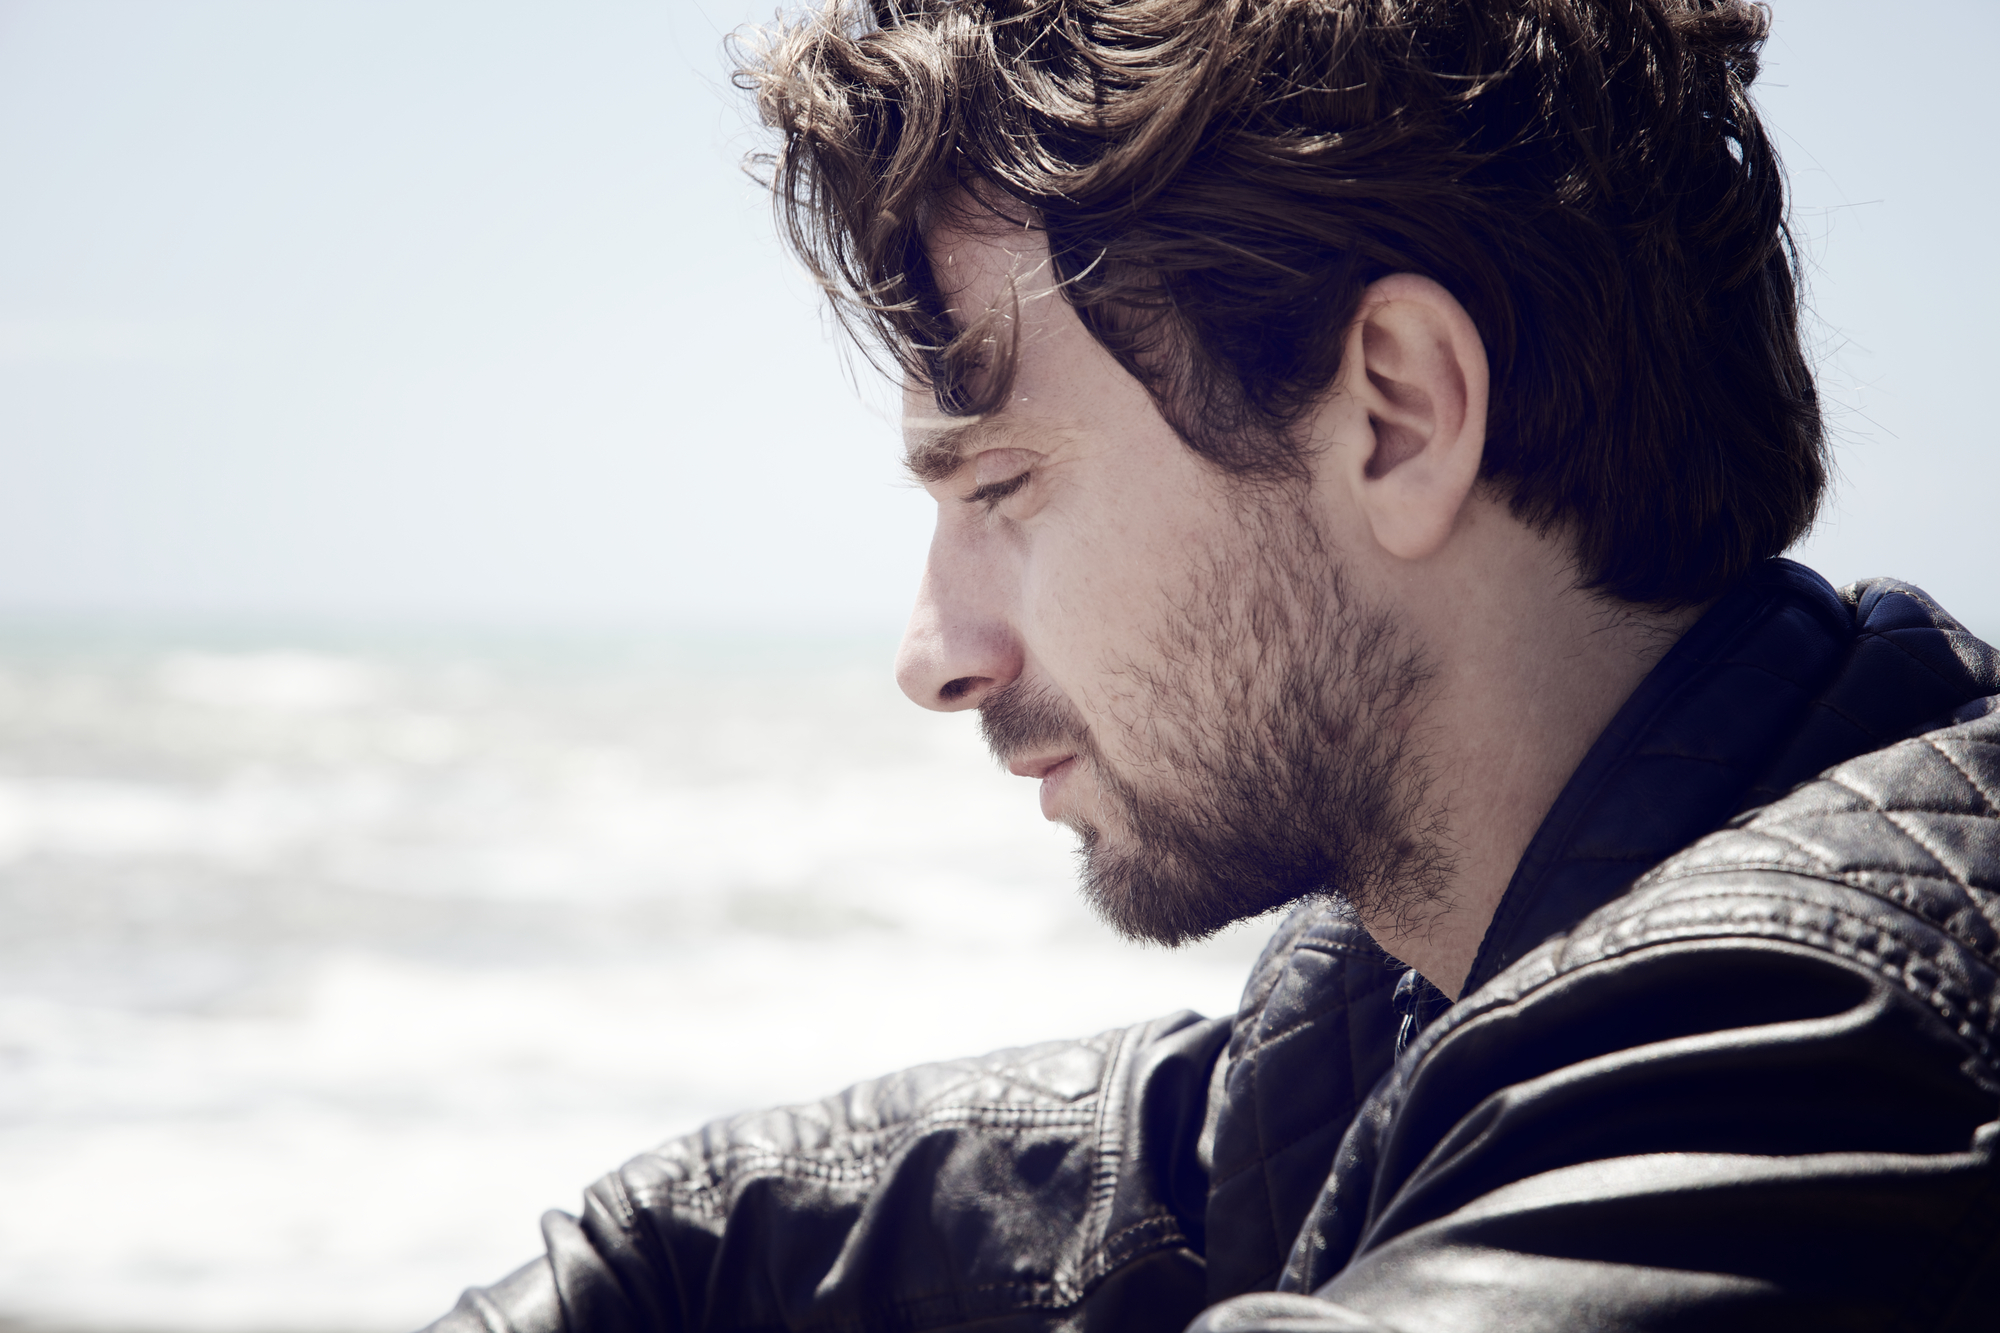 Side view of a young man with wavy brown hair and a beard wearing a black leather jacket. He appears deep in thought while looking down, with a blurred ocean background under a clear sky.